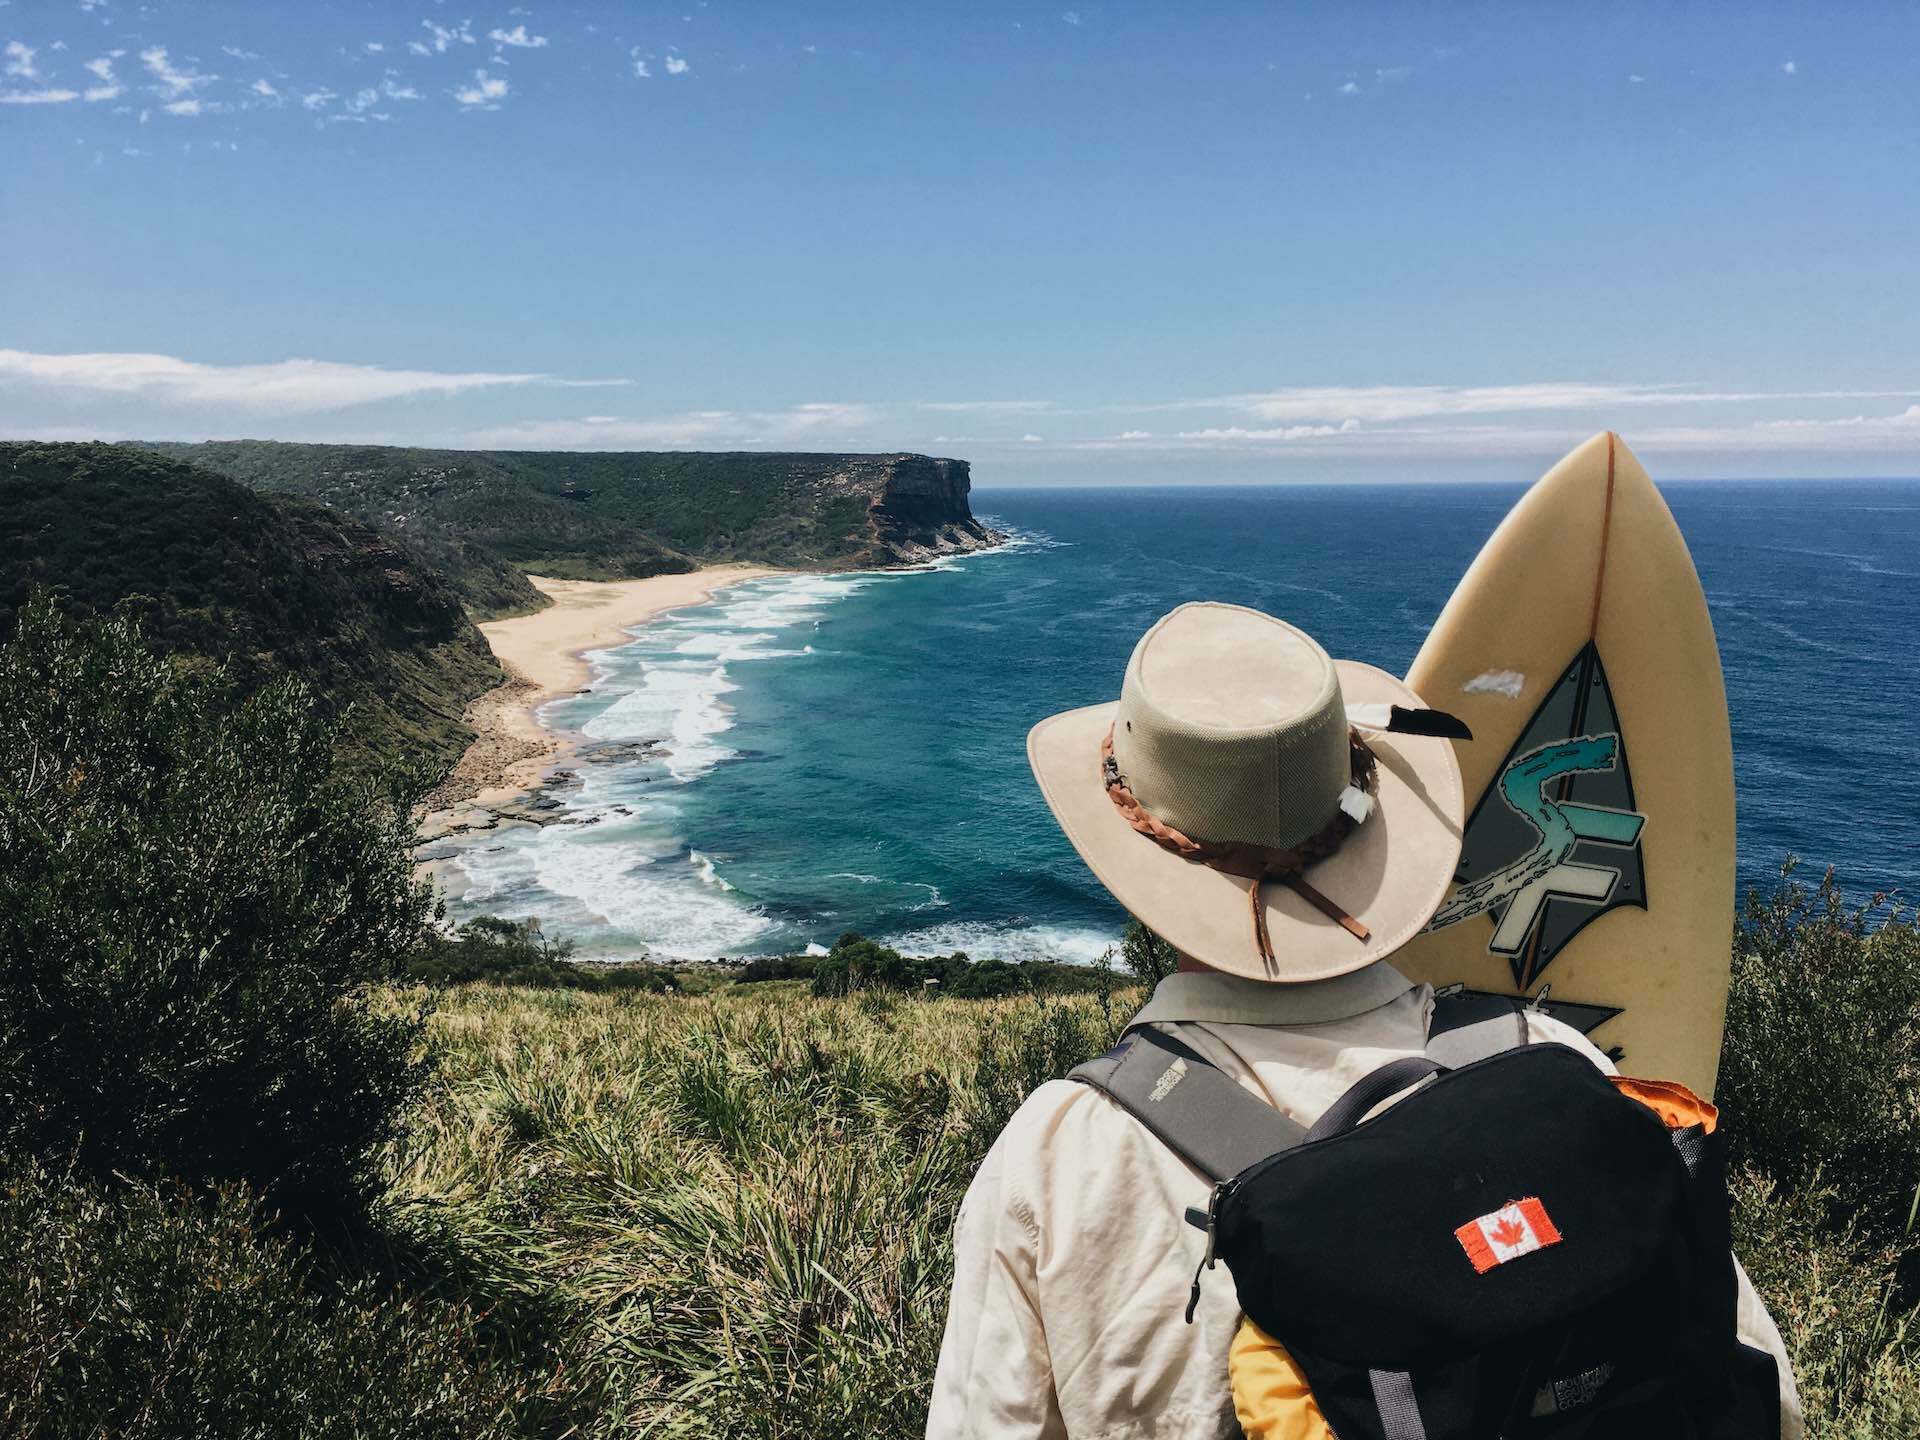 Hike Your Surfboards to Dreamy North Era Campground Right by the Beach, James Tugwell - Royal National Park, Surfing, Hiking, Camping, North Era Campground